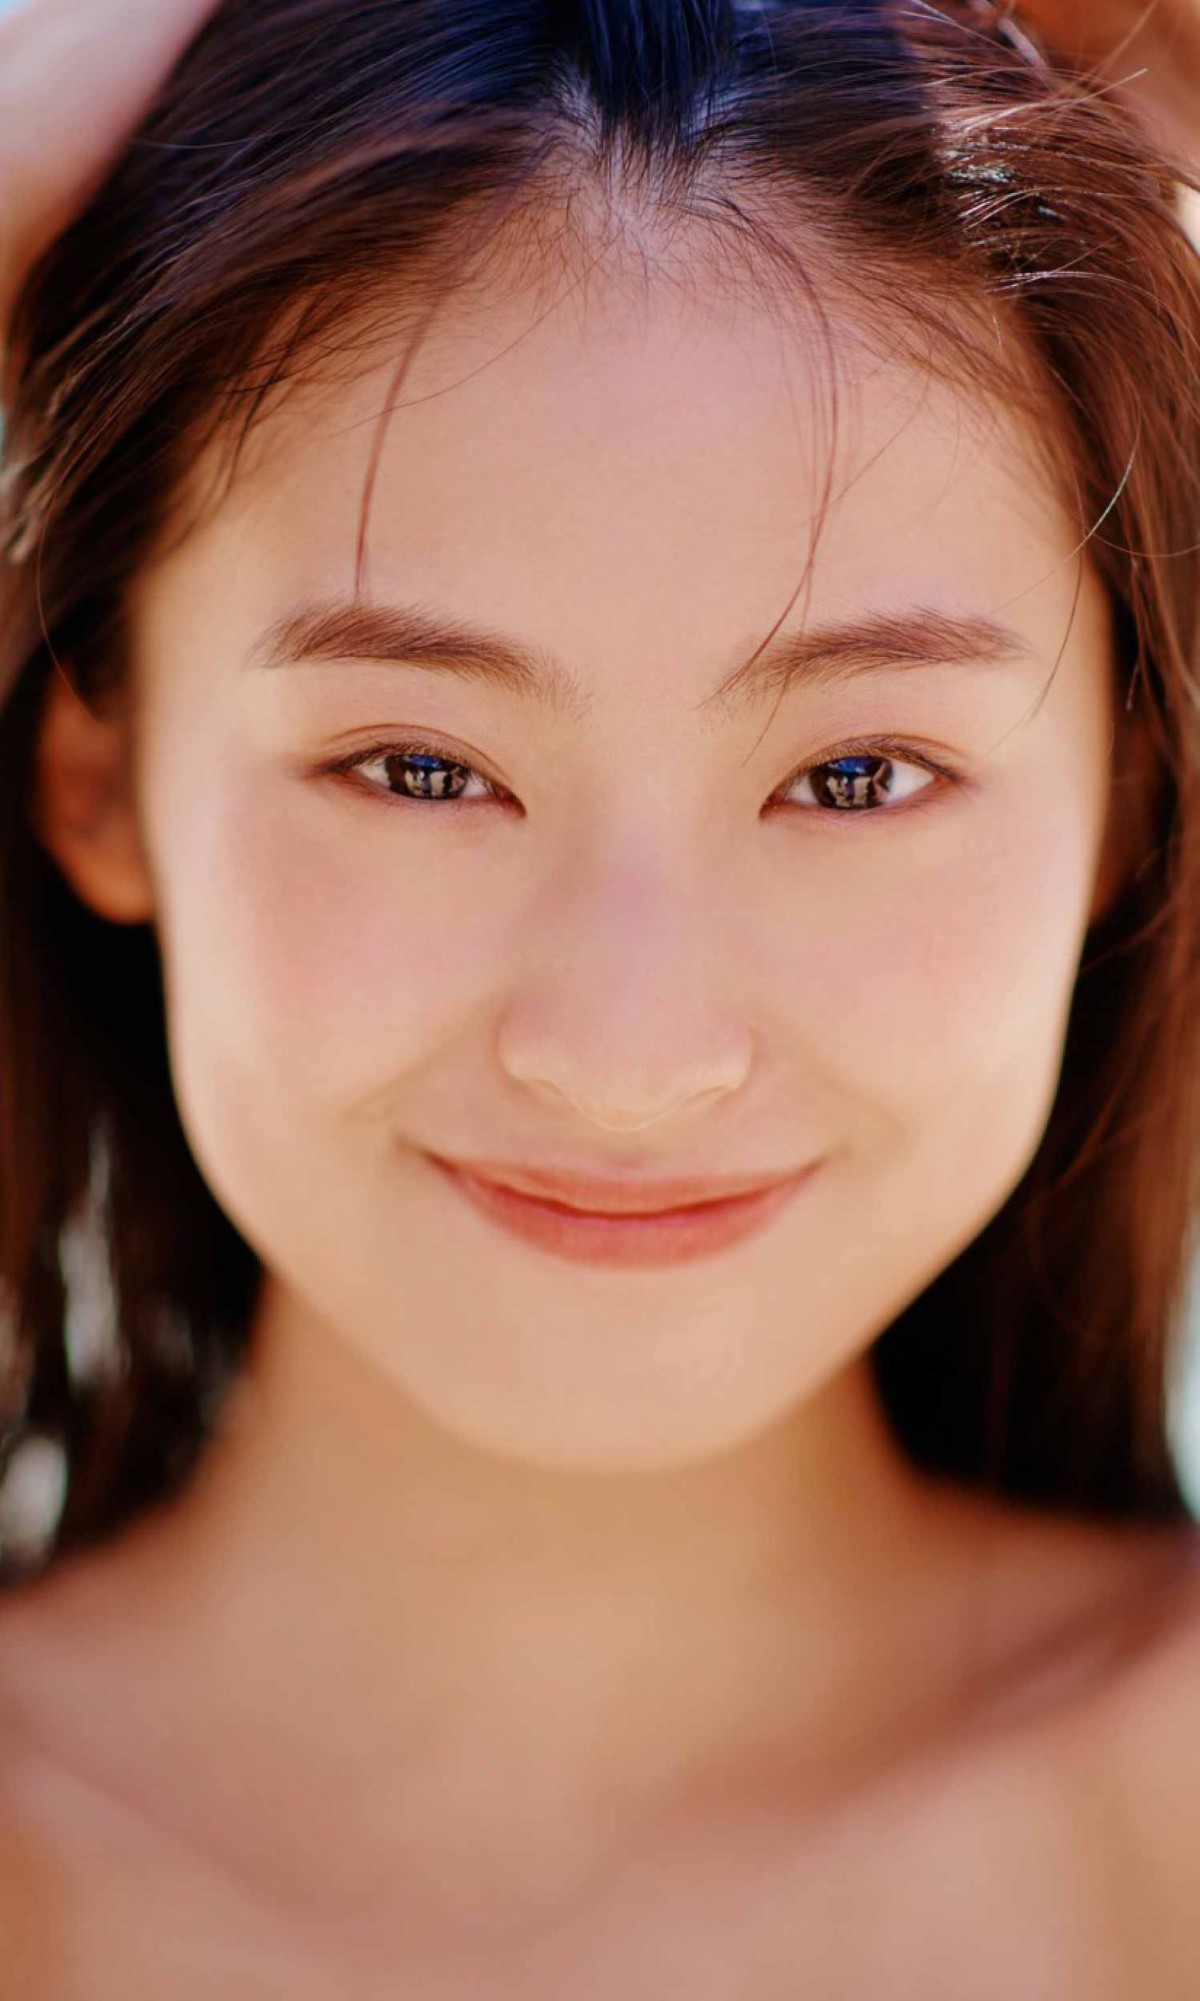 Photobook Ayaka Imoto 井本彩花 The Heroine Is Dignified And Beautiful 17 Years Old 0017 7511656105.jpg